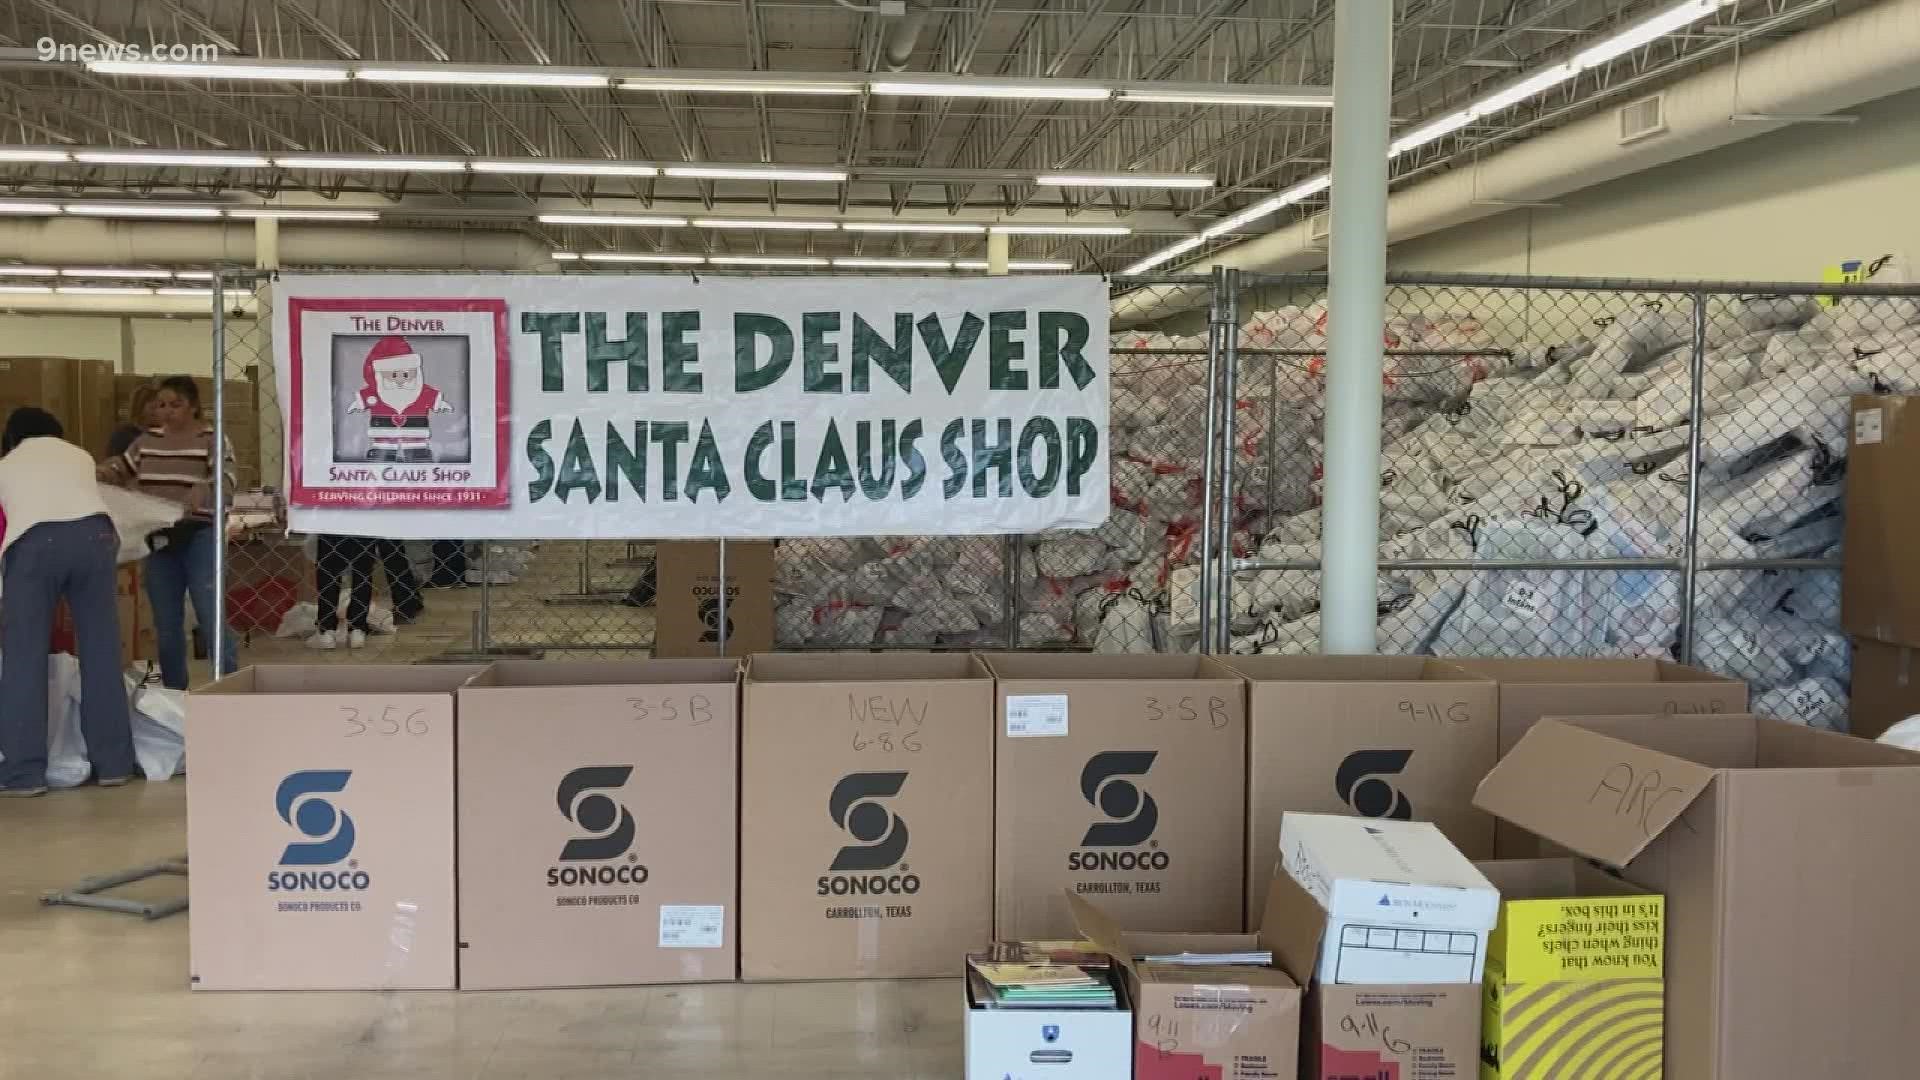 The organization partners with local groups to find families who need toys for their children, with help from over 100 volunteers.